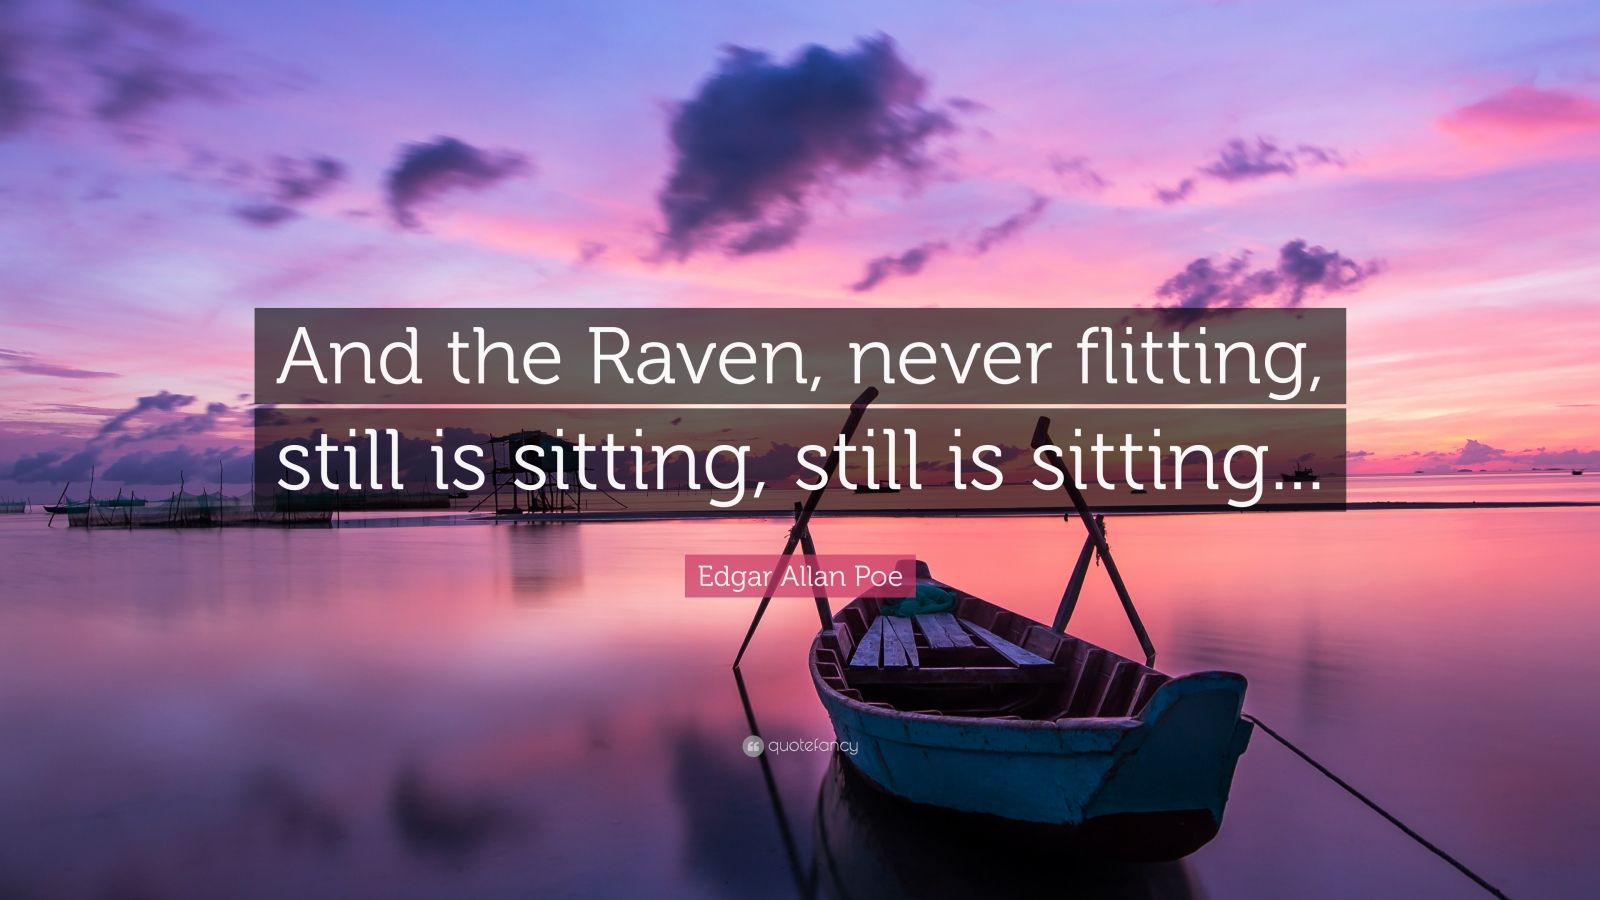 Edgar Allan Poe Quote: "And the Raven, never flitting, still is sitting, still is sitting ...